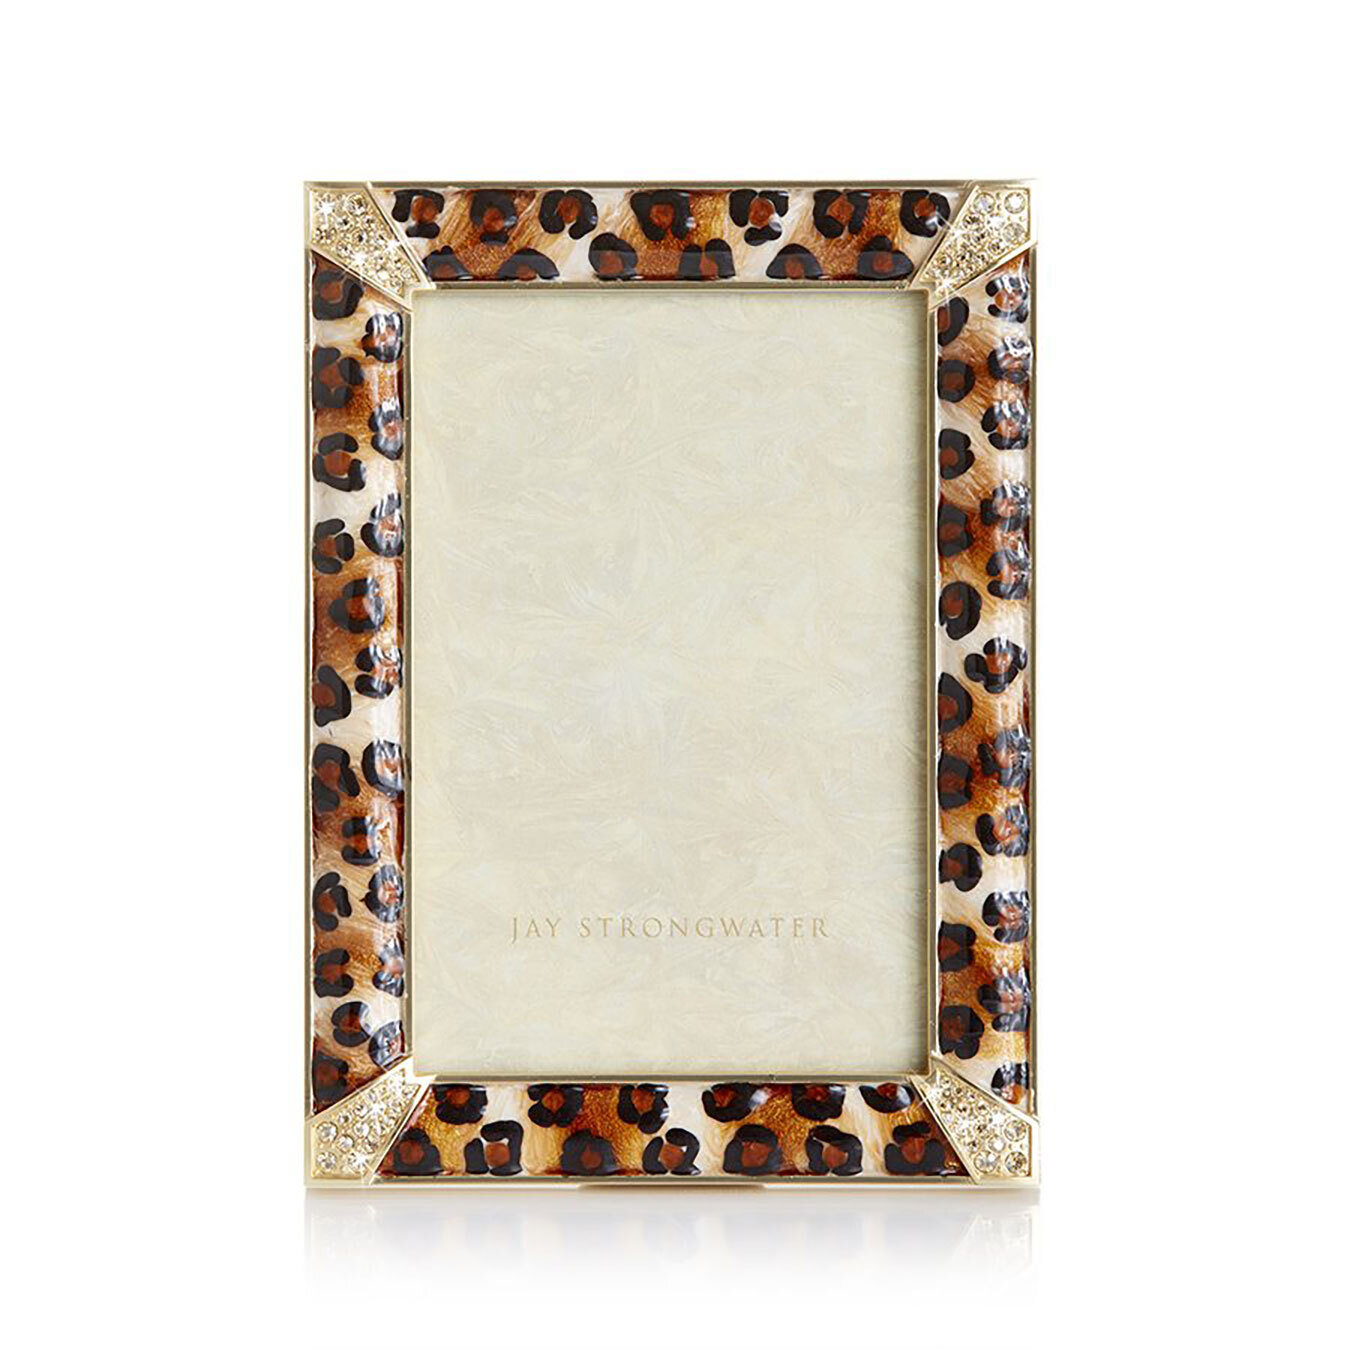 Jay Strongwater Leopard Spotted Pave Corner 4" x 6" Picture Frame SPF5830-203